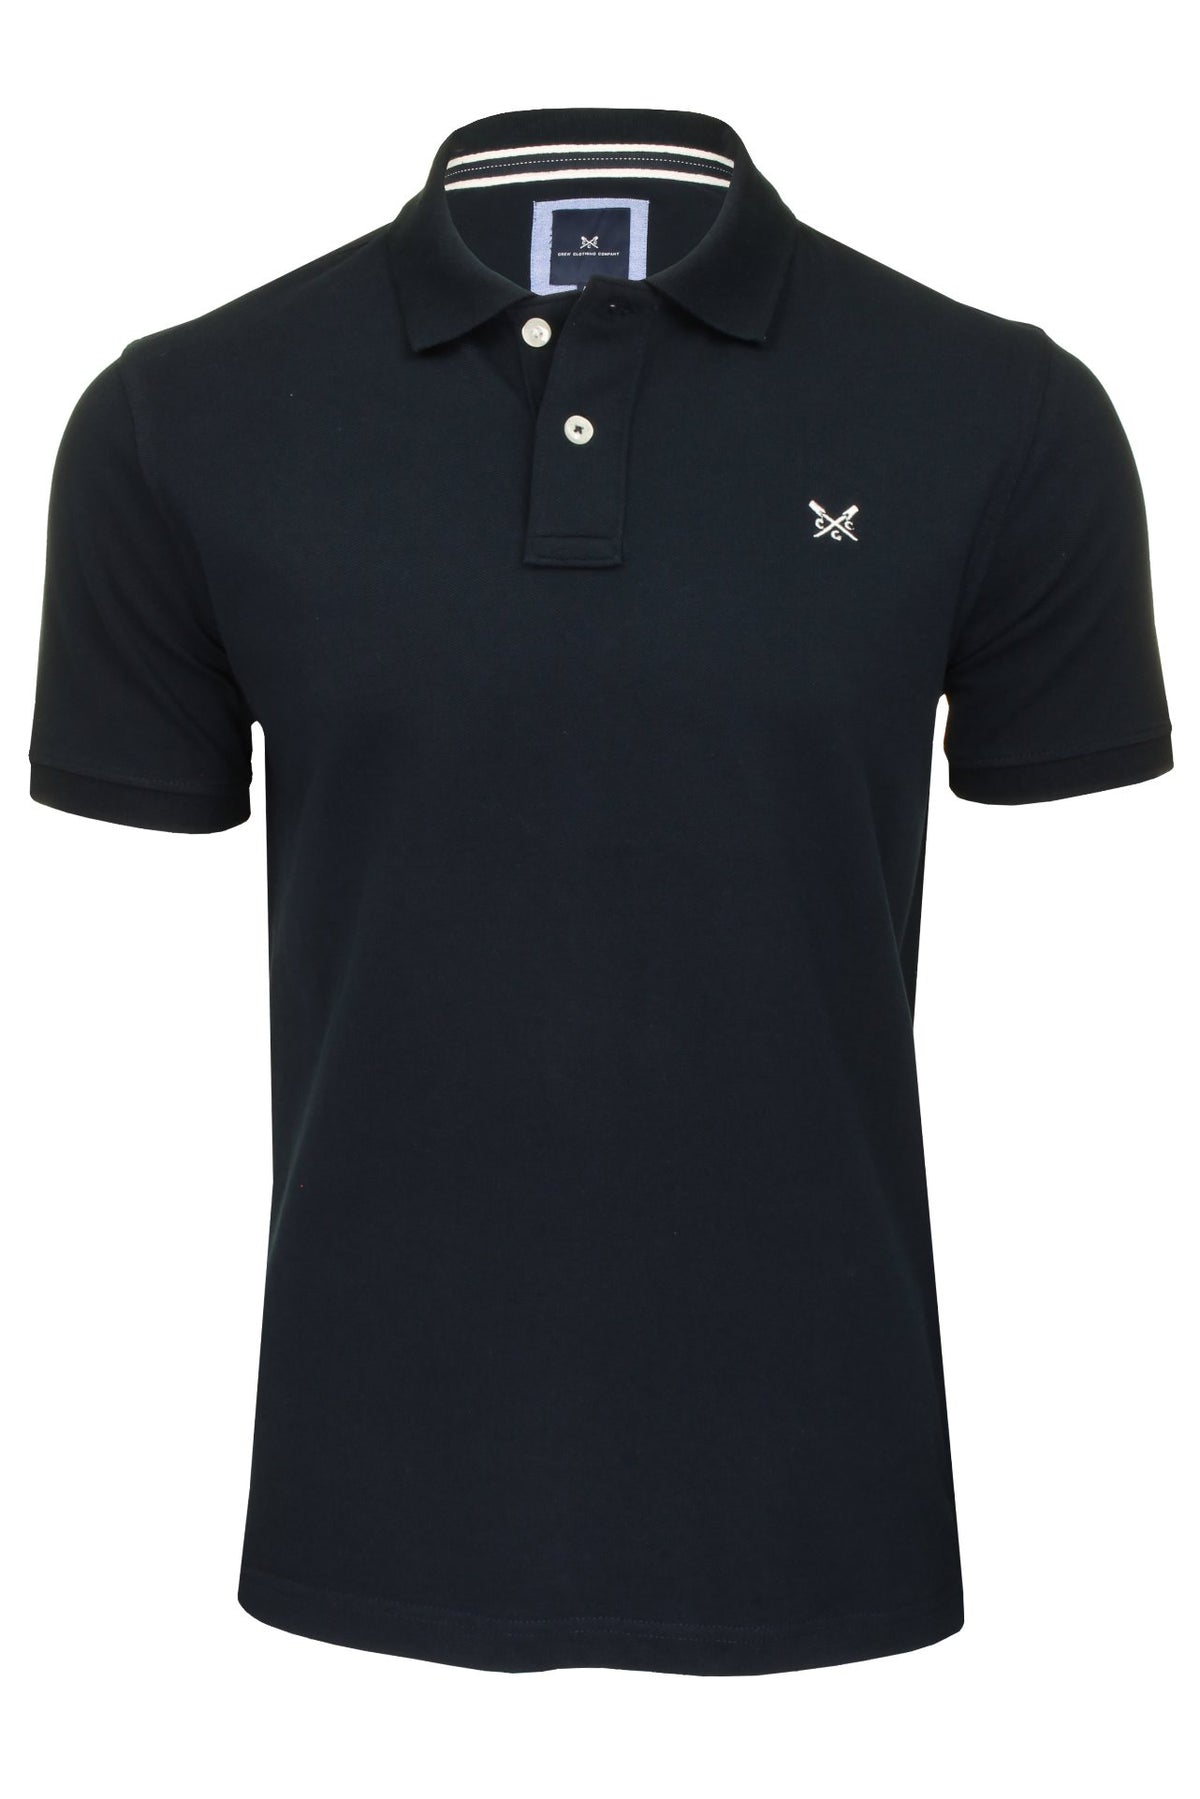 Crew Clothing Mens Pique Polo Shirt 'Classic Pique Polo' - Short Sleeved, 01, Mke002, Heritage Navy